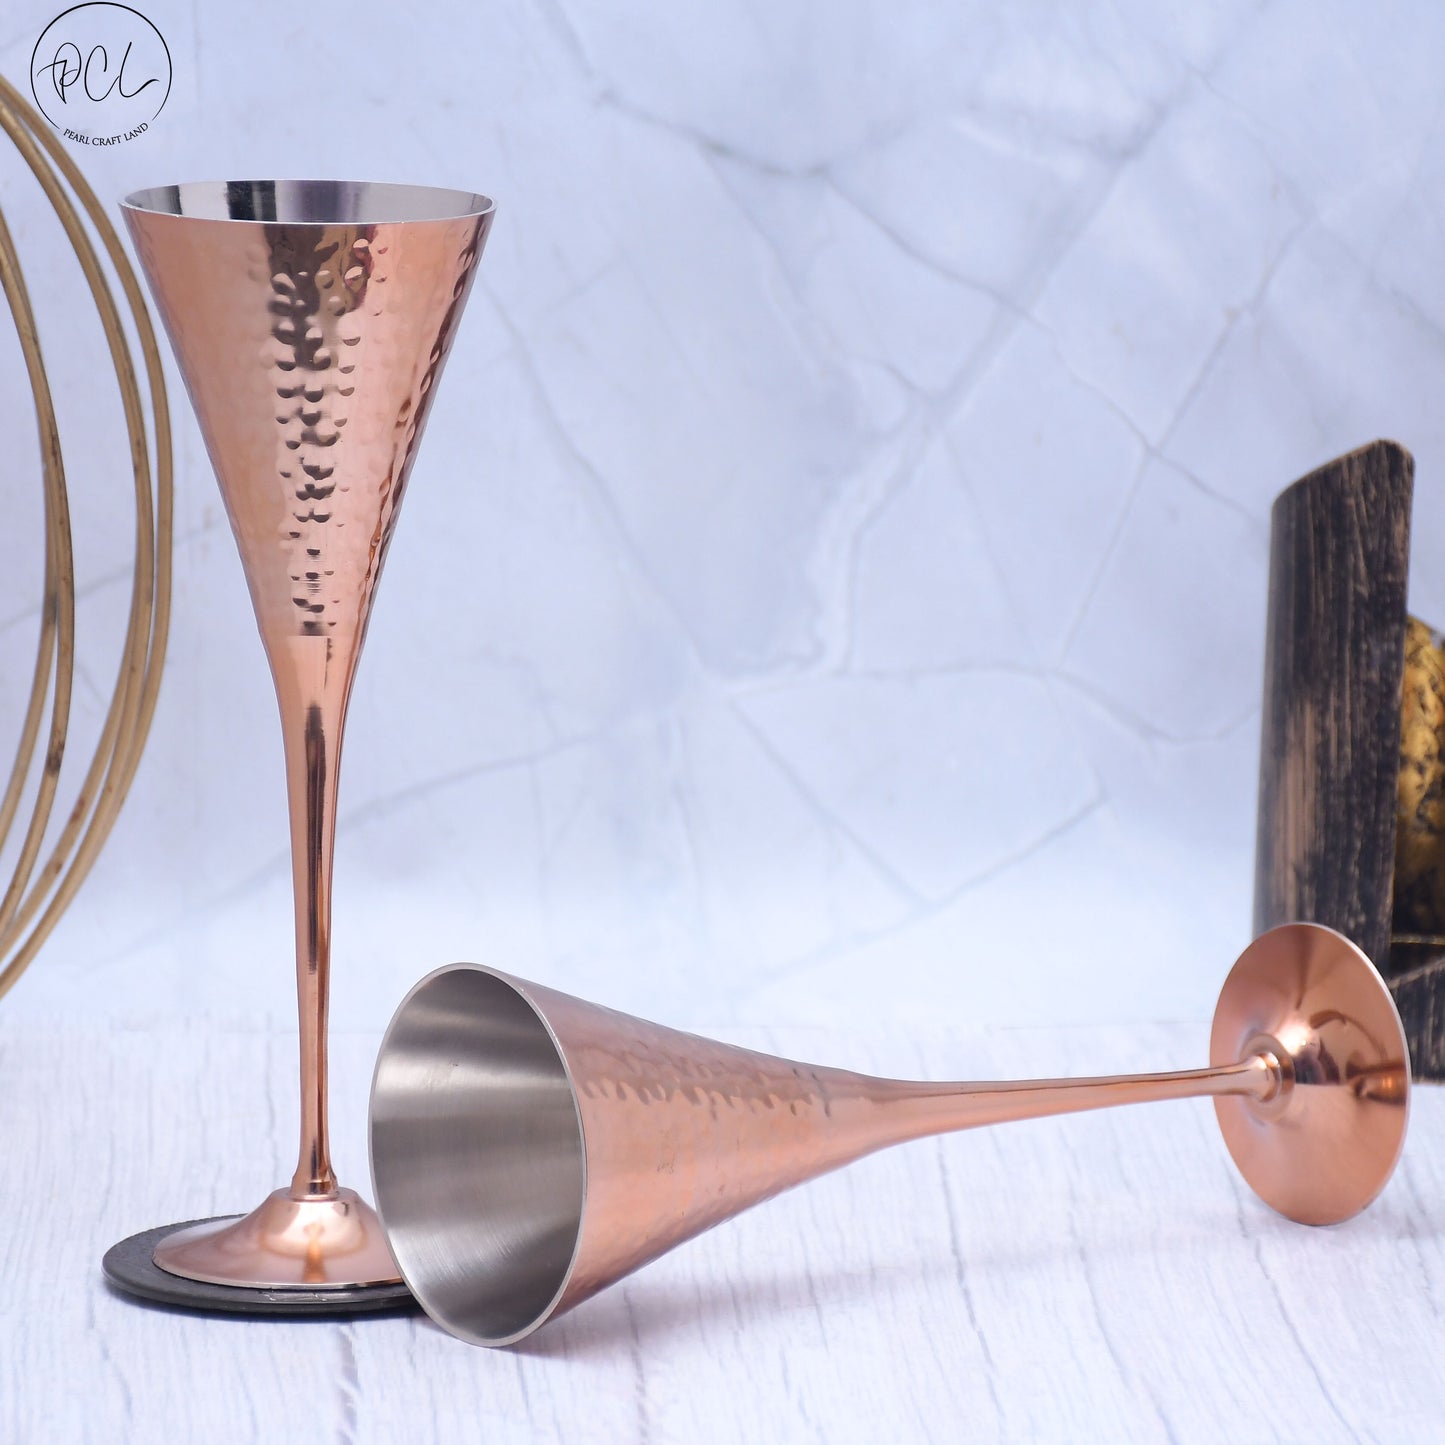 Beautifully Designed Conical Copper Finished Goblet Glasses | Set of 2